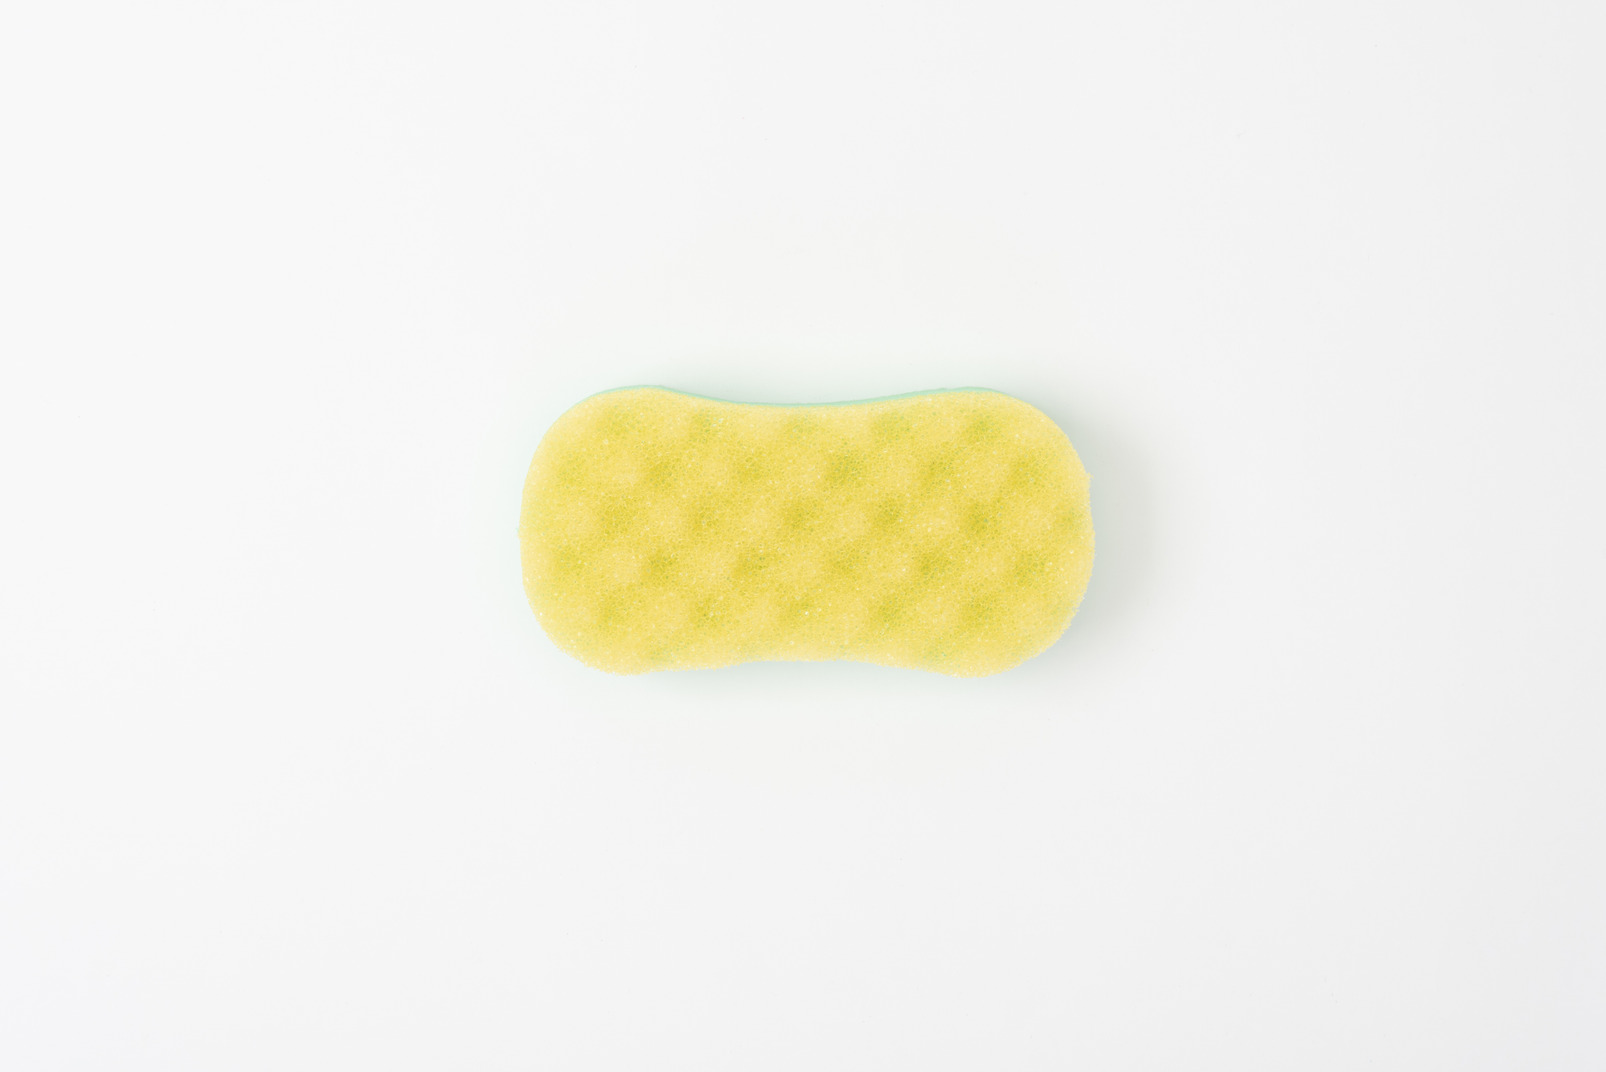 Easy to use color cleaning sponge